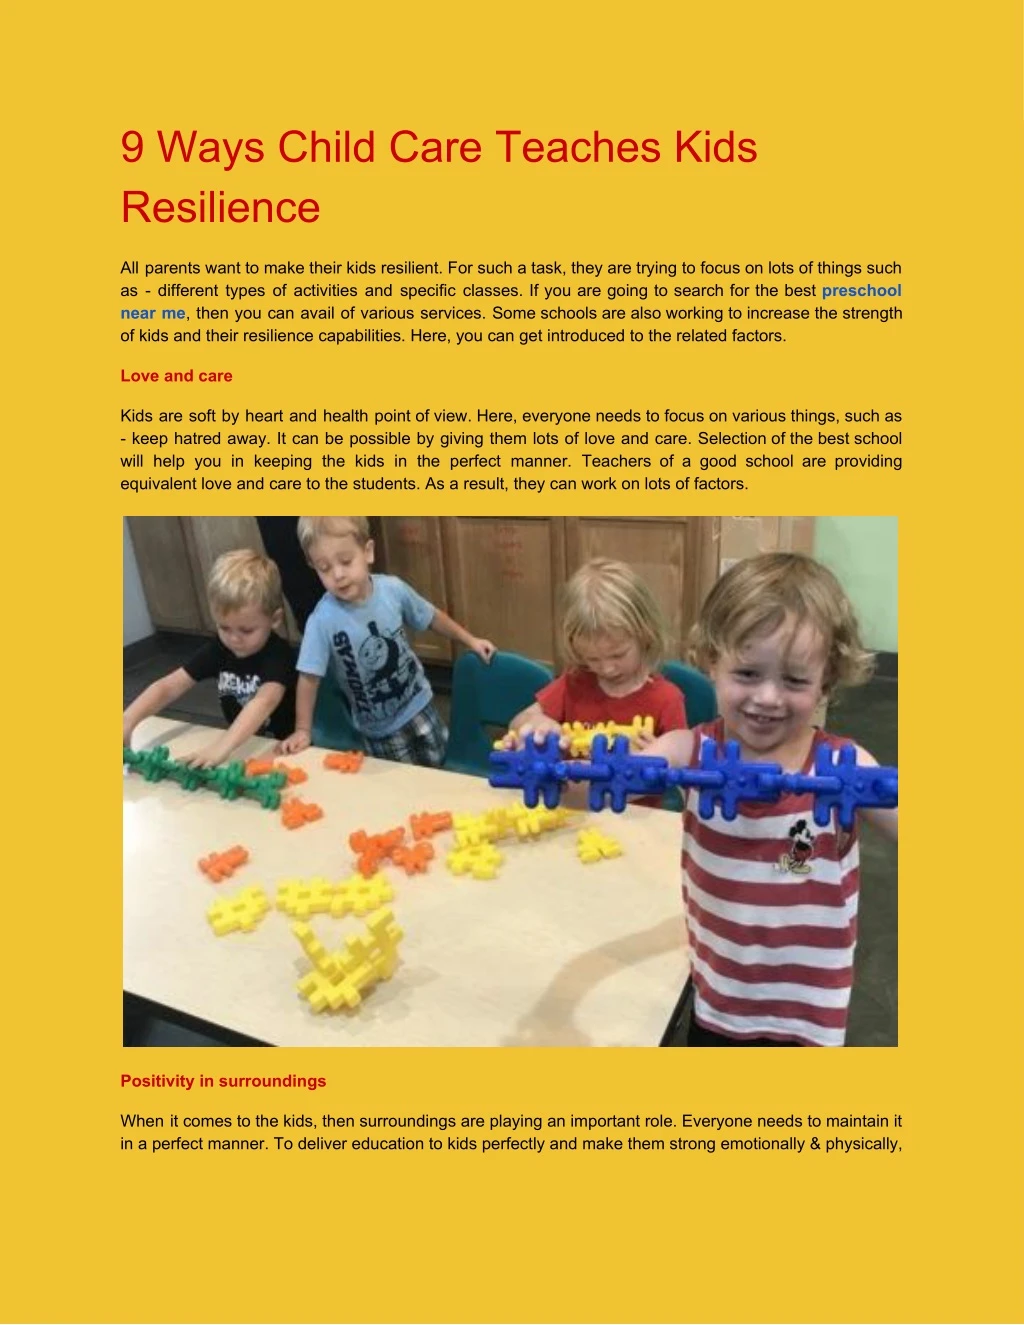 9 ways child care teaches kids resilience